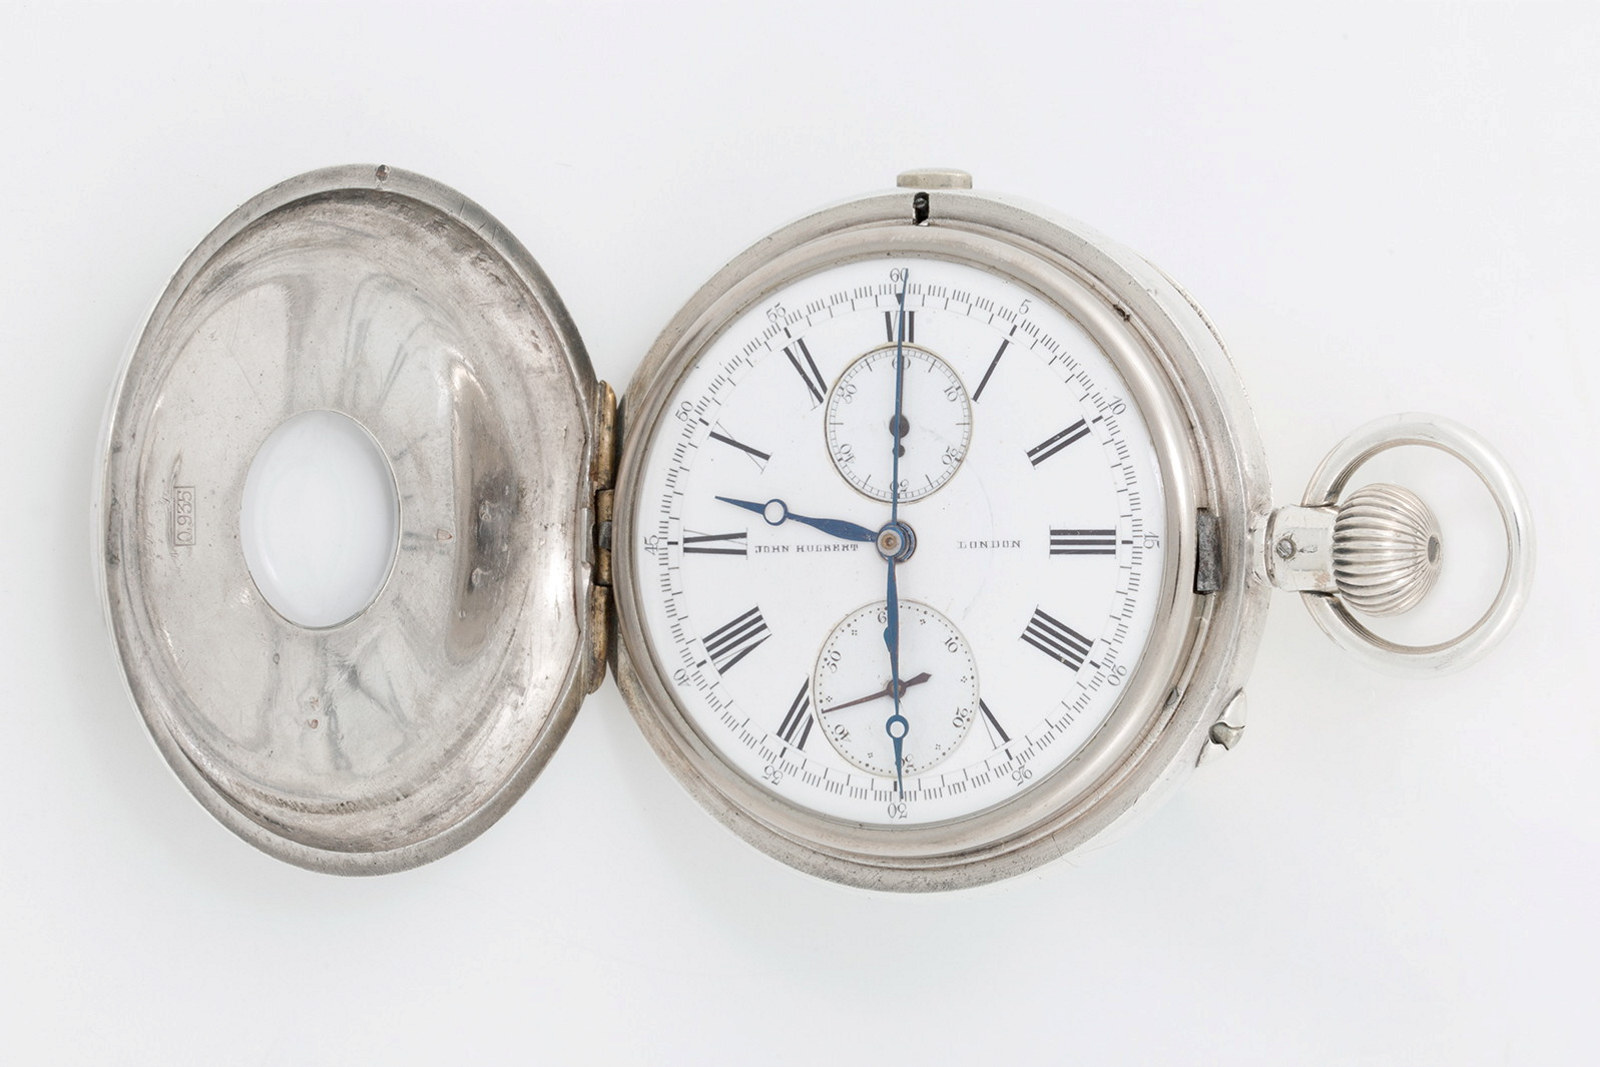 Silver cased half hunter watch owned by George Terry, made 1880